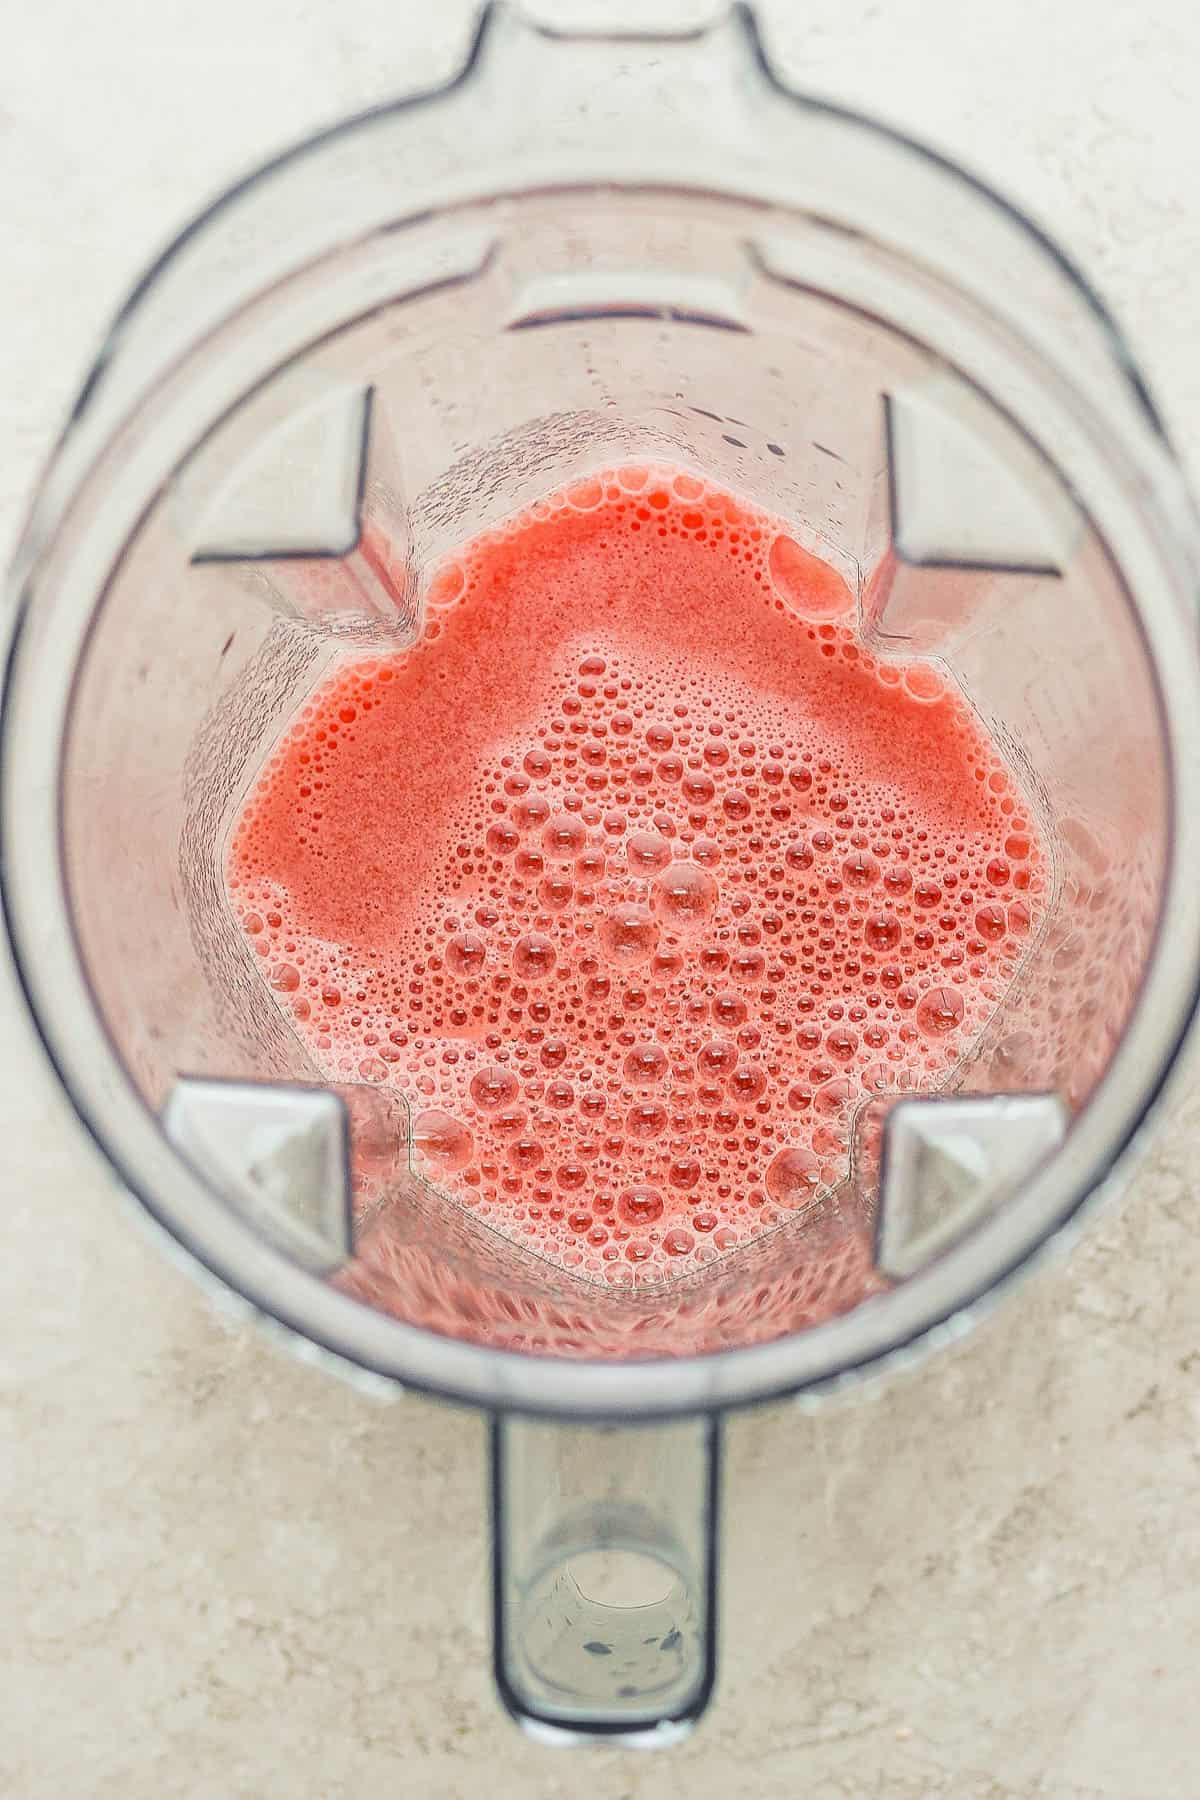 A fully blended watermelon spritzer.